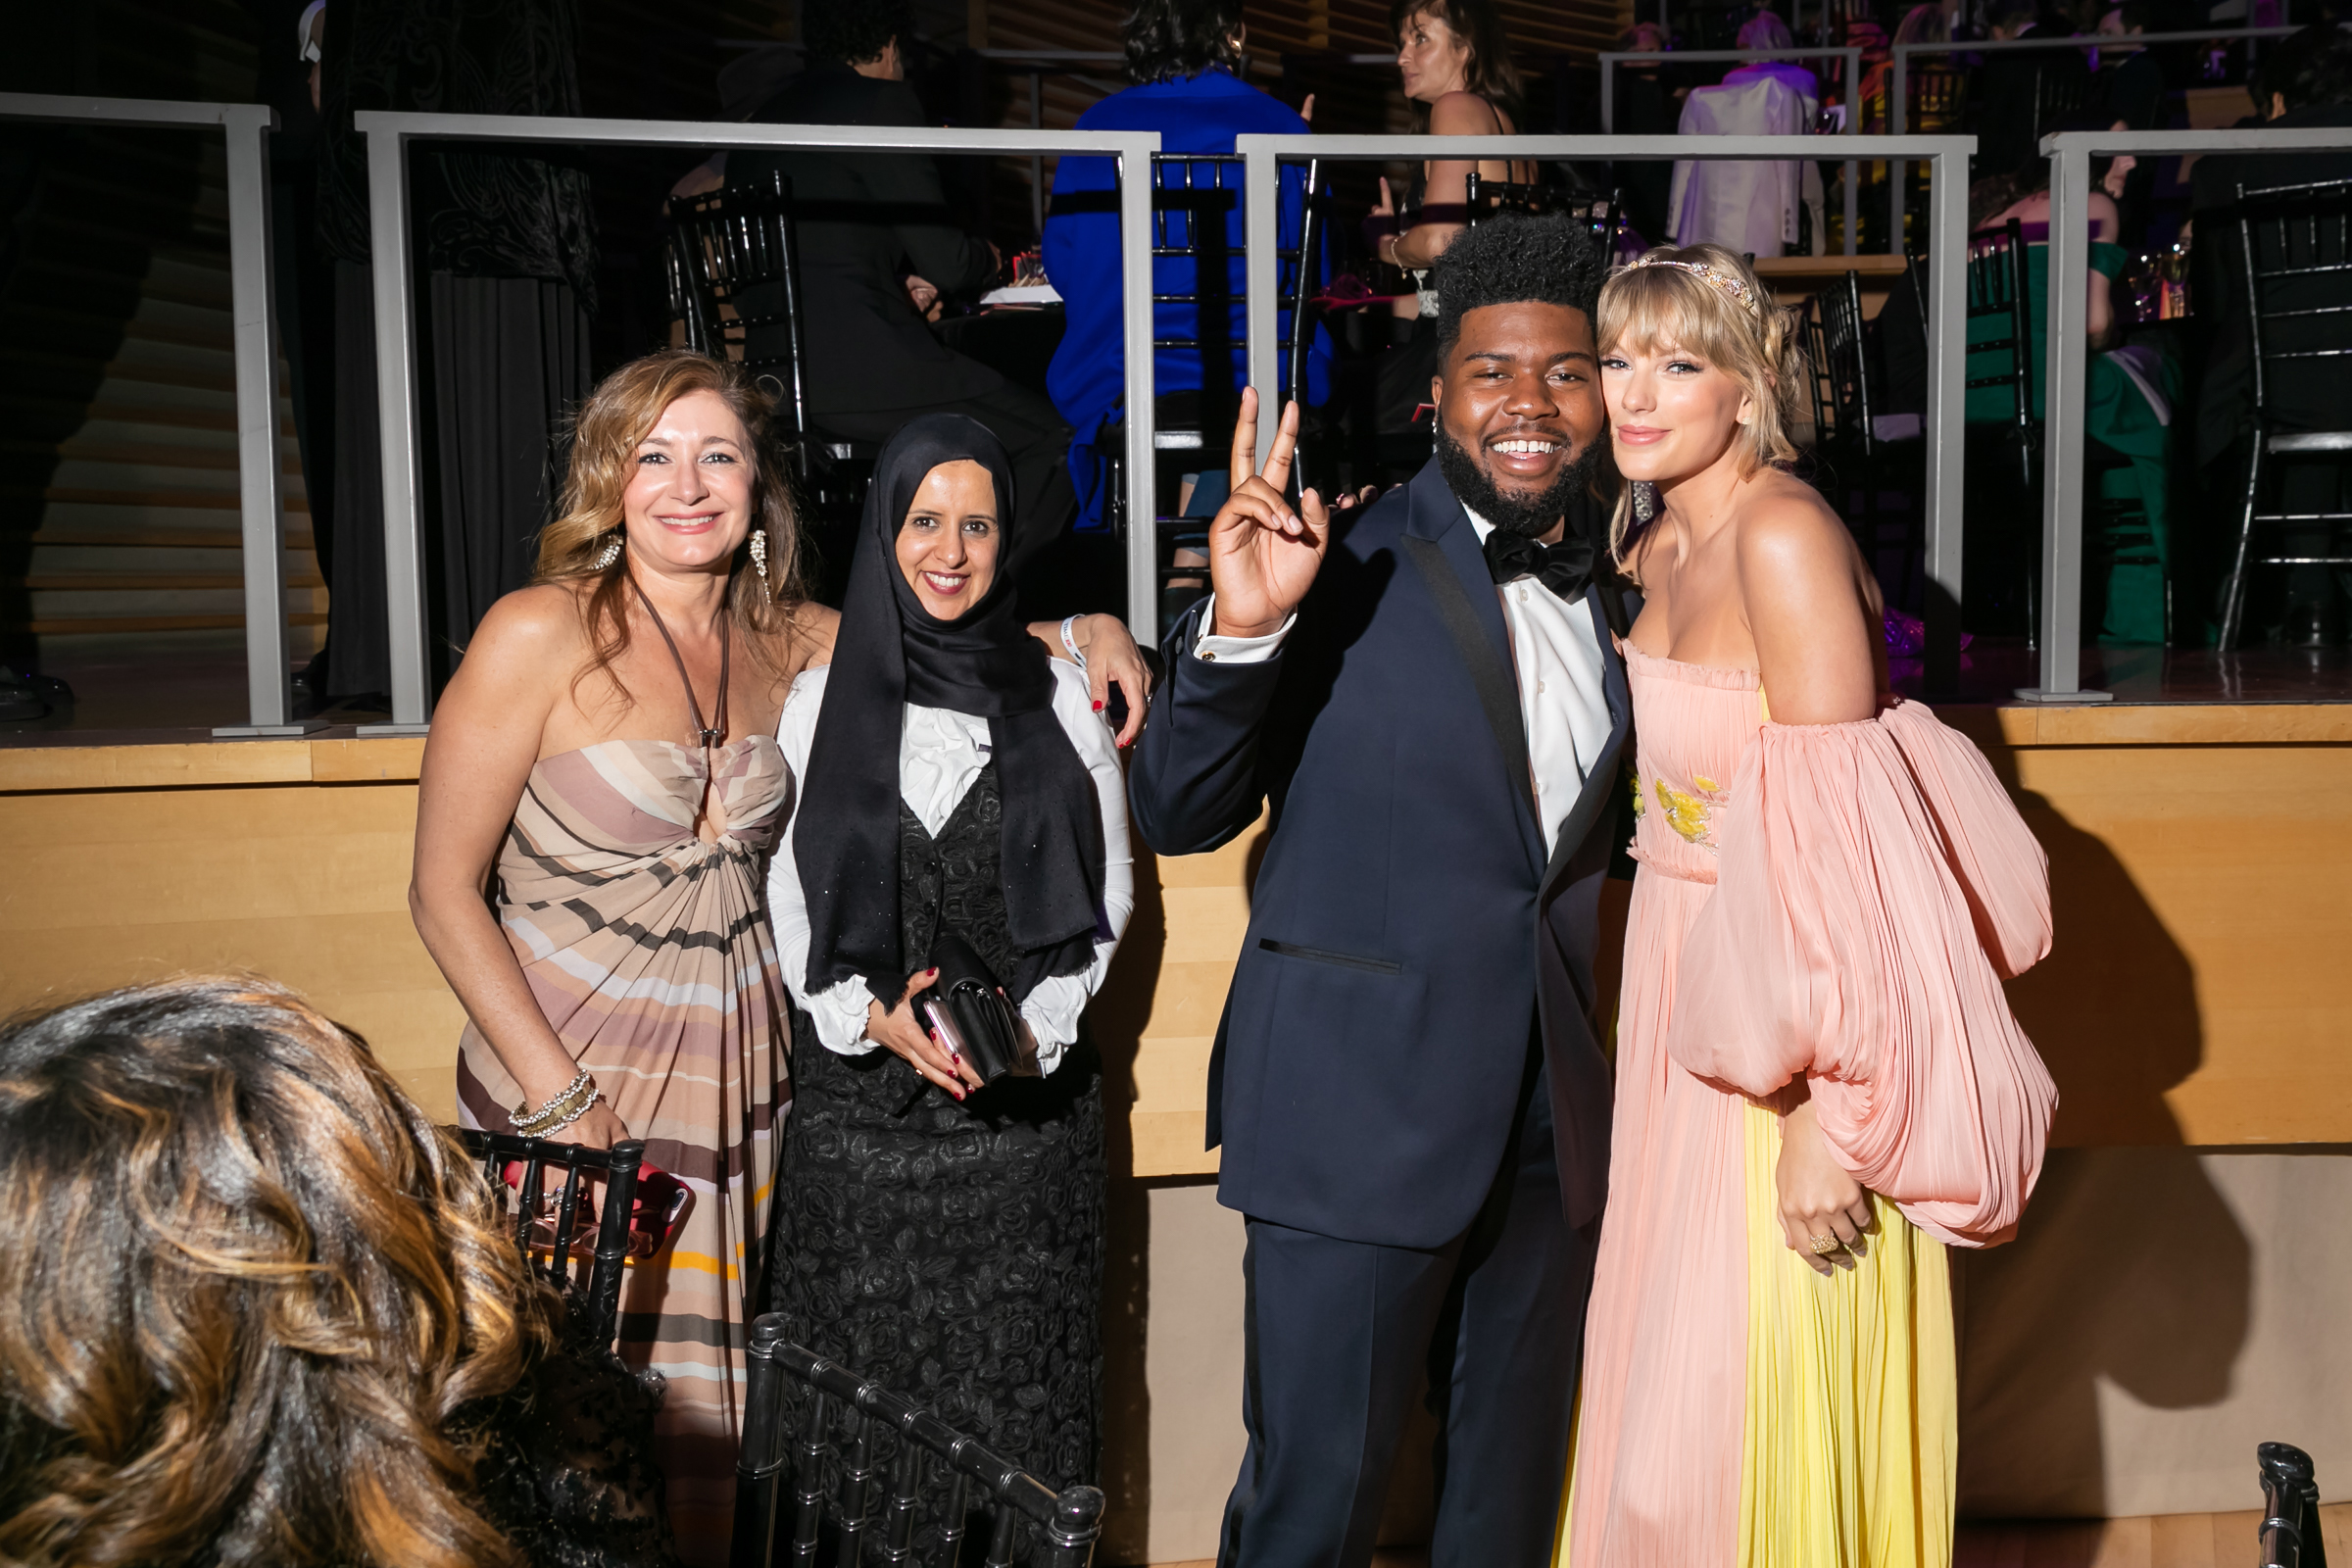 Sarah Leah Whitson, Radhya al-Mutawakel, Khalid and Taylor Swift at the Time 100 Gala at Jazz at Lincoln Center in New York City on April 23, 2019. (Kevin Tachman for TIME)